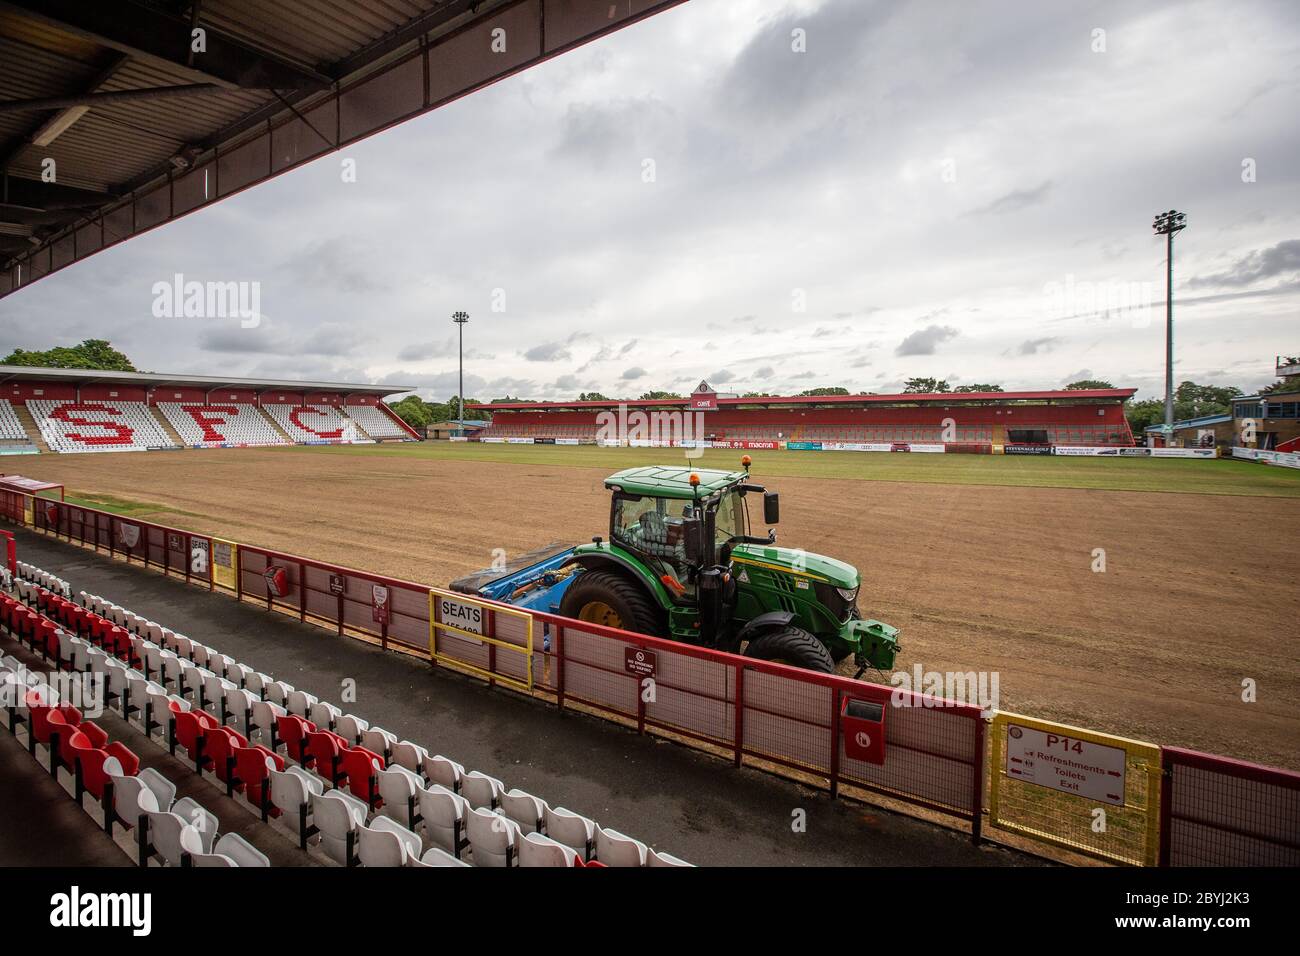 Tractor on football / soccer pitch at sports ground during end of season work by grounds staff relaying turf. Stock Photo